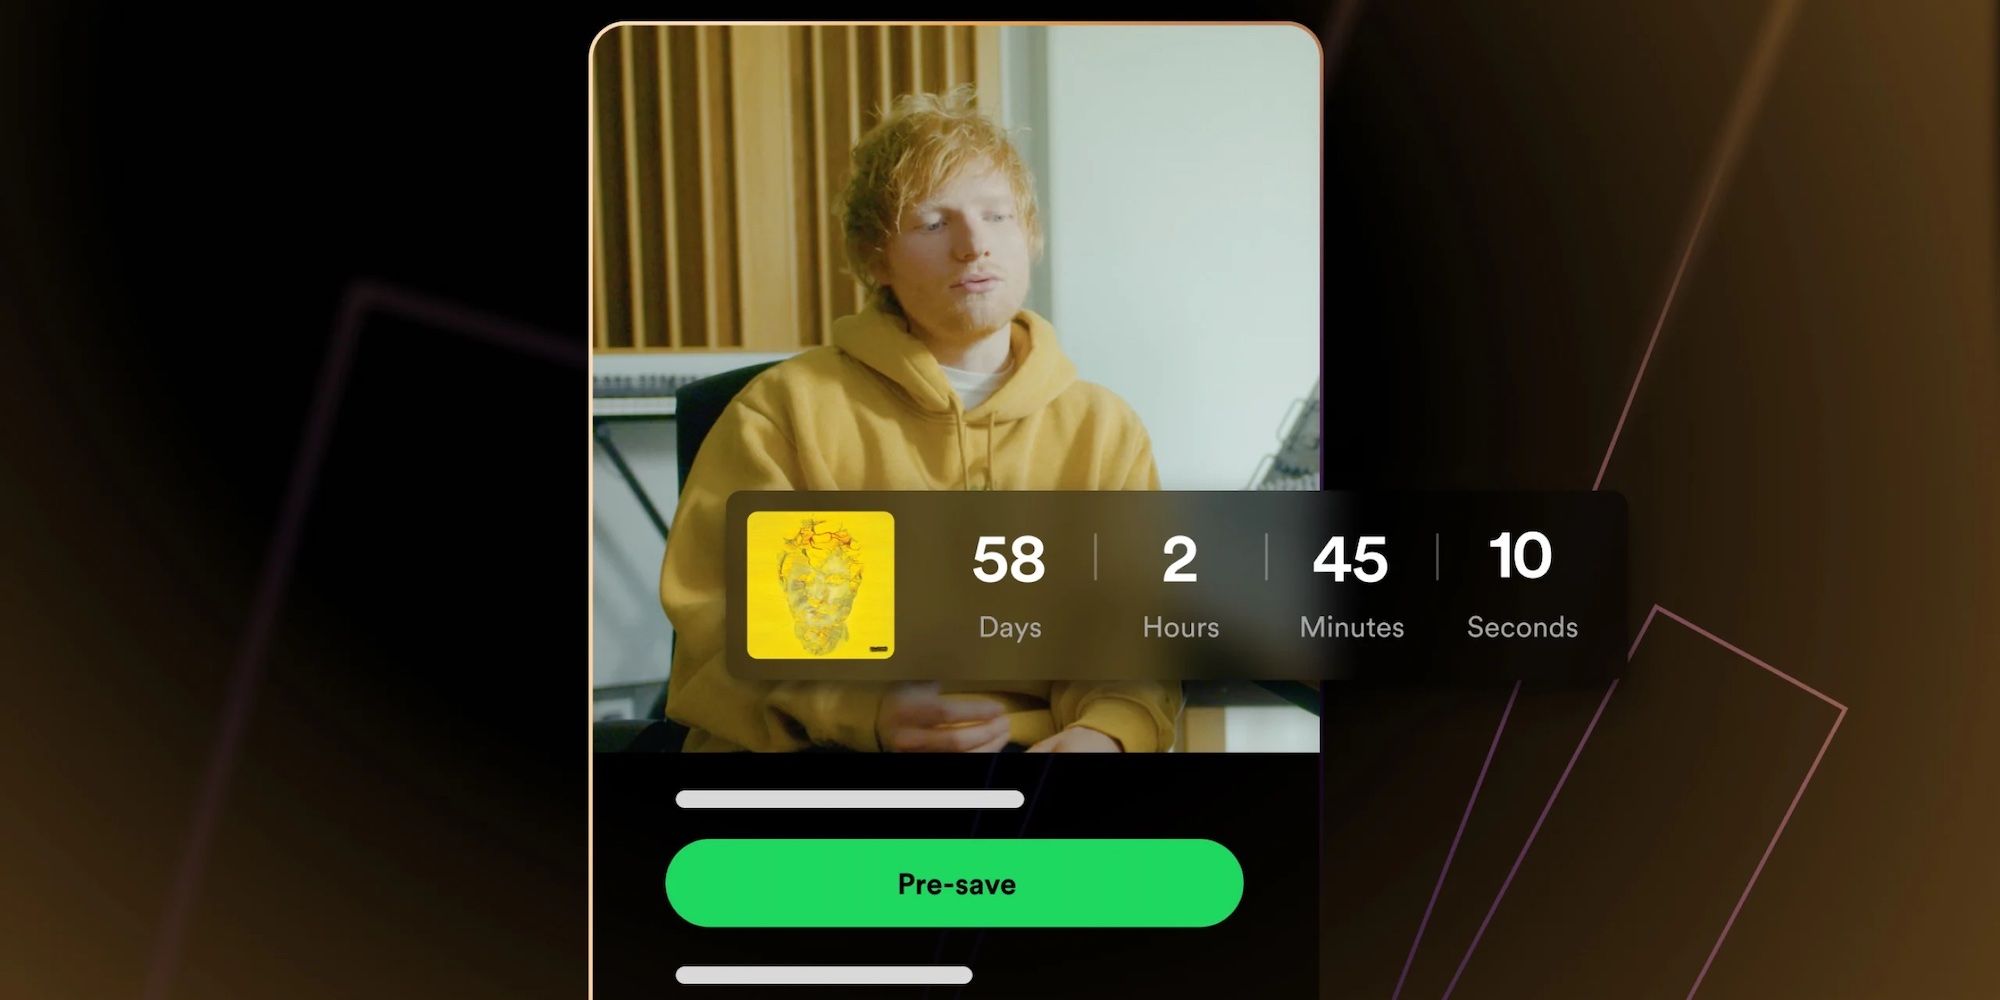 Spotify Countown Page for Ed Sheeran displaying pre-save option